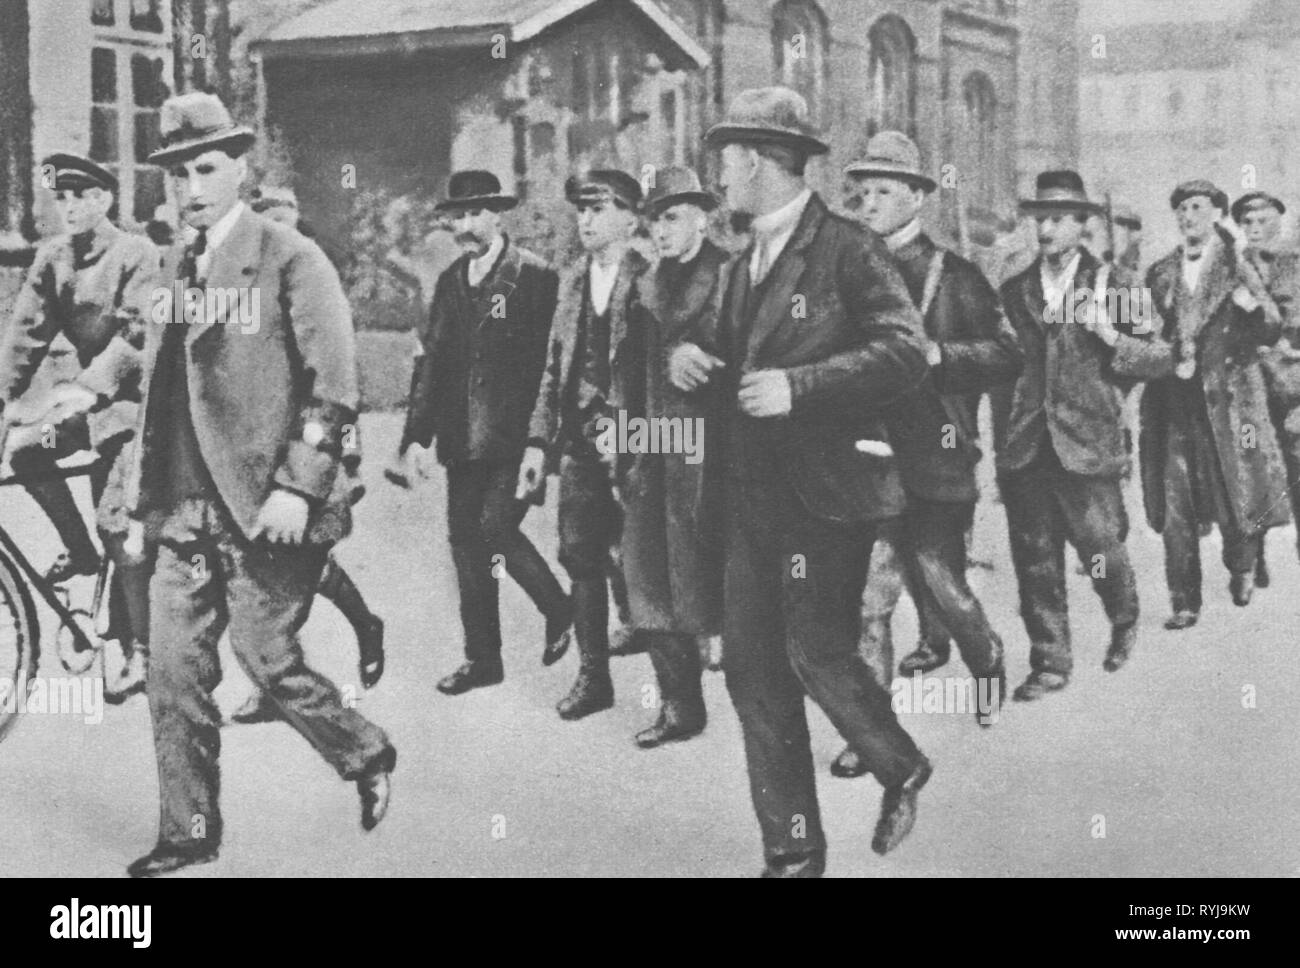 Ruhr Uprising, 13.3. - 12.4. 1920, members of the Red Ruhr Army, March 1920, March uprising, Ruhr war, Ruhr conflict, insurgency, rebellion, insurgencies, revolts, rebellions, in revolt, Red Army, communist, communists, Ruhr area, Ruhr Valley, Free State of Prussia, Rhine Province, North Rhine-Westphalia, North-Rhine, Rhine, Westphalia, Nordrhein-Westfalen, Nordrhein-Westphalen, Germany, German Reich, Third Reich, Weimar Republic, 20th century, 1920s, members, member, historic, historical, people, Additional-Rights-Clearance-Info-Not-Available Stock Photo